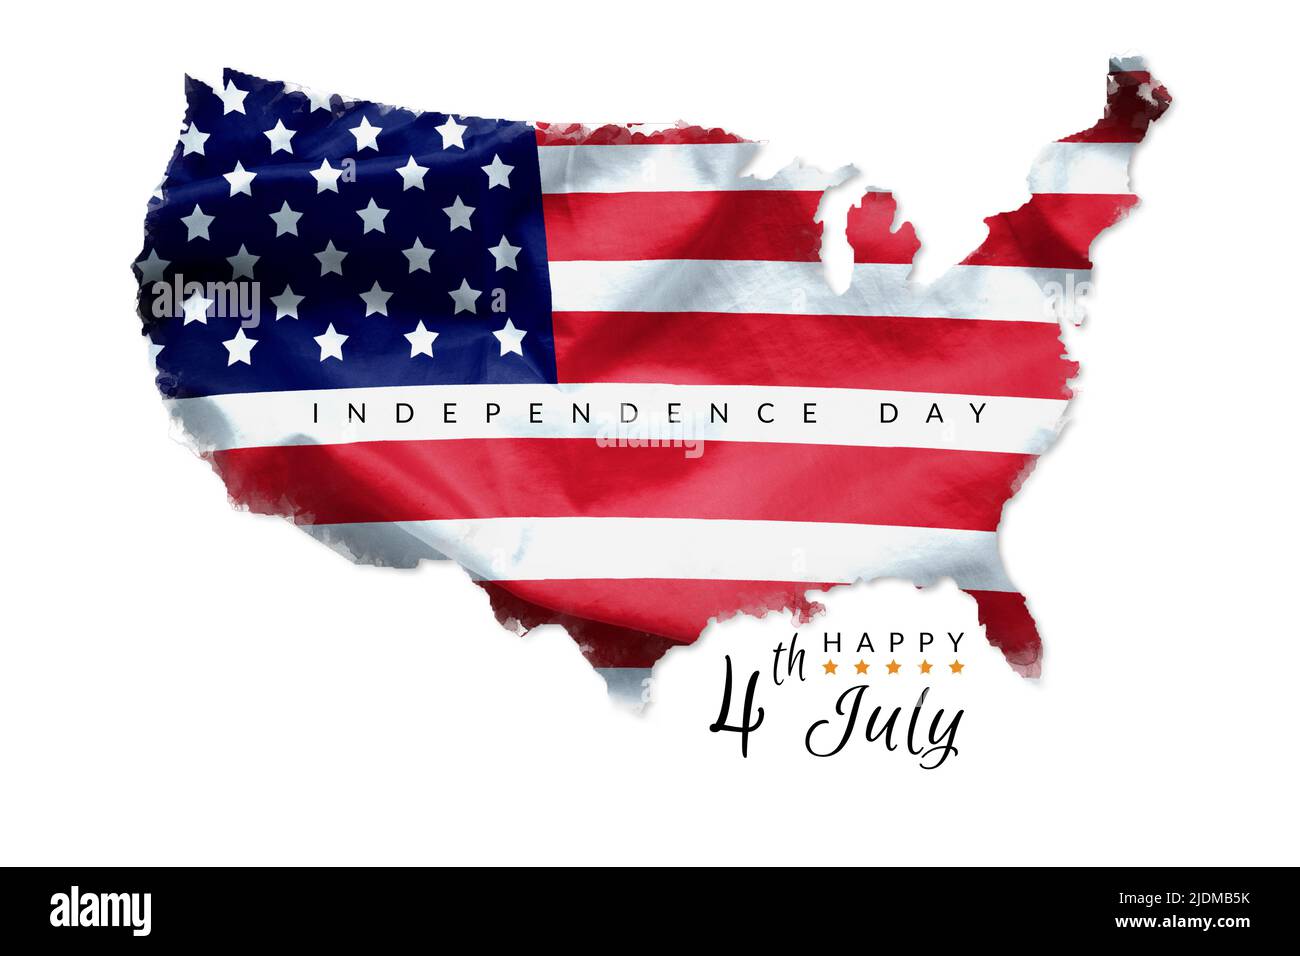 happy 4th July Independence Day greeting card American flag grunge background on America geography map shape isolated on white Stock Photo